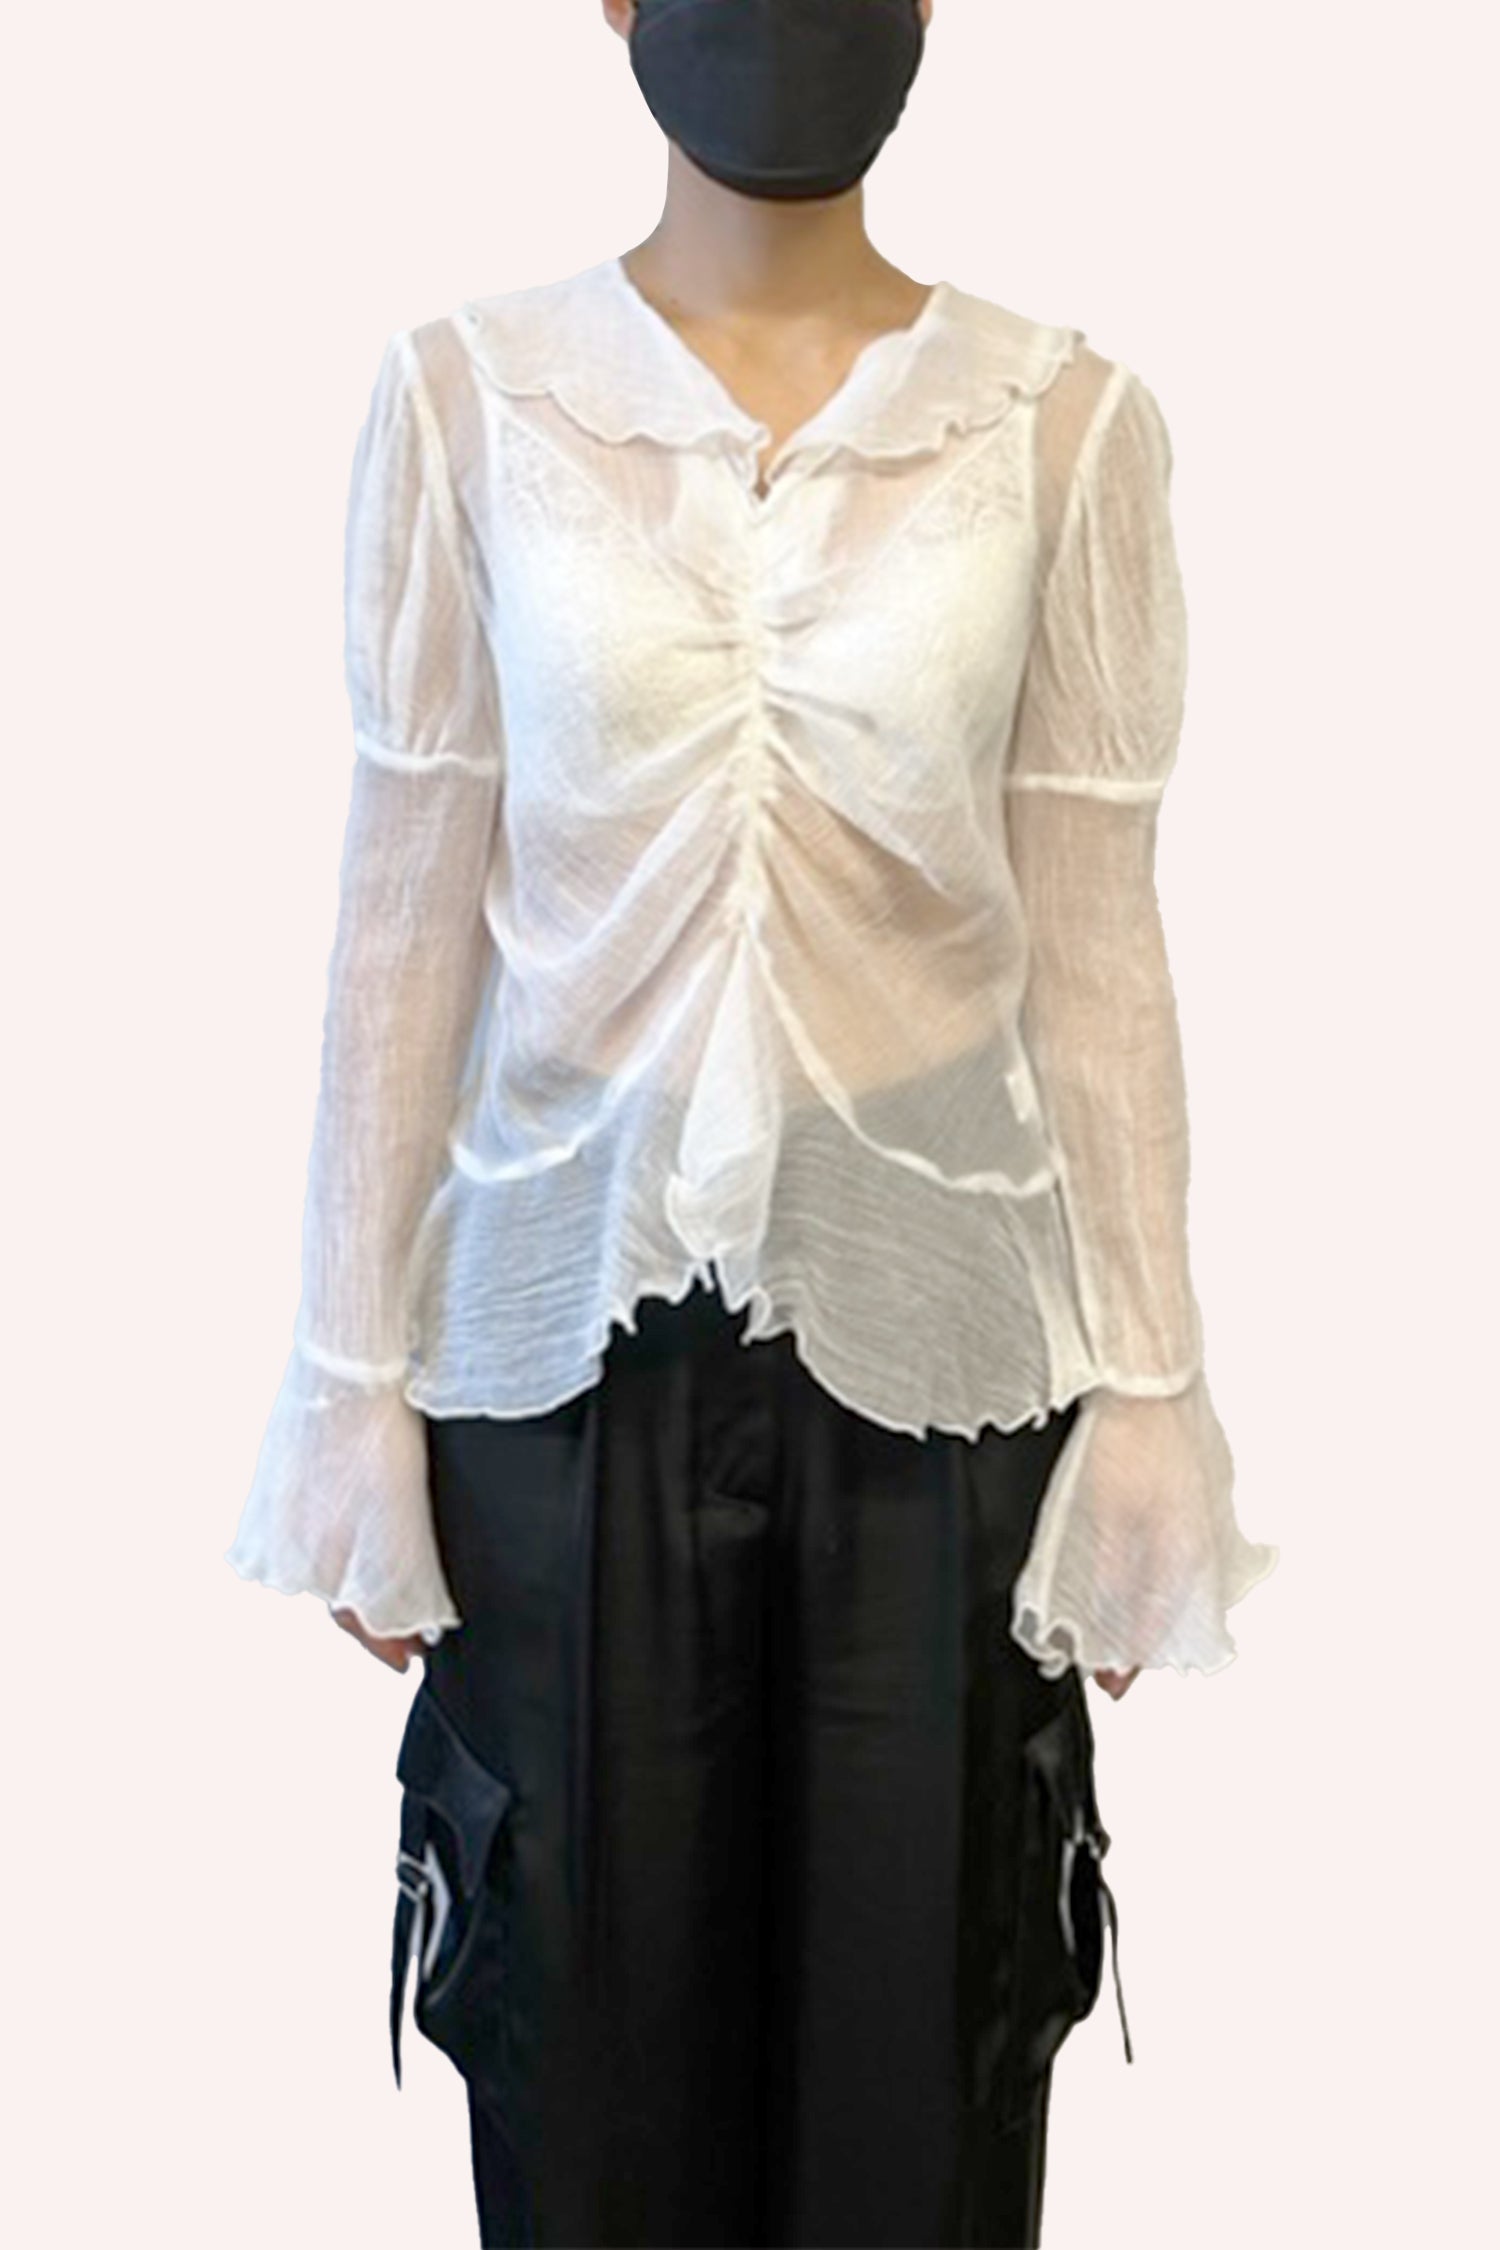 Crinkle Chiffon Blouse White is transparent, with a ruffle effect that rises under the bust